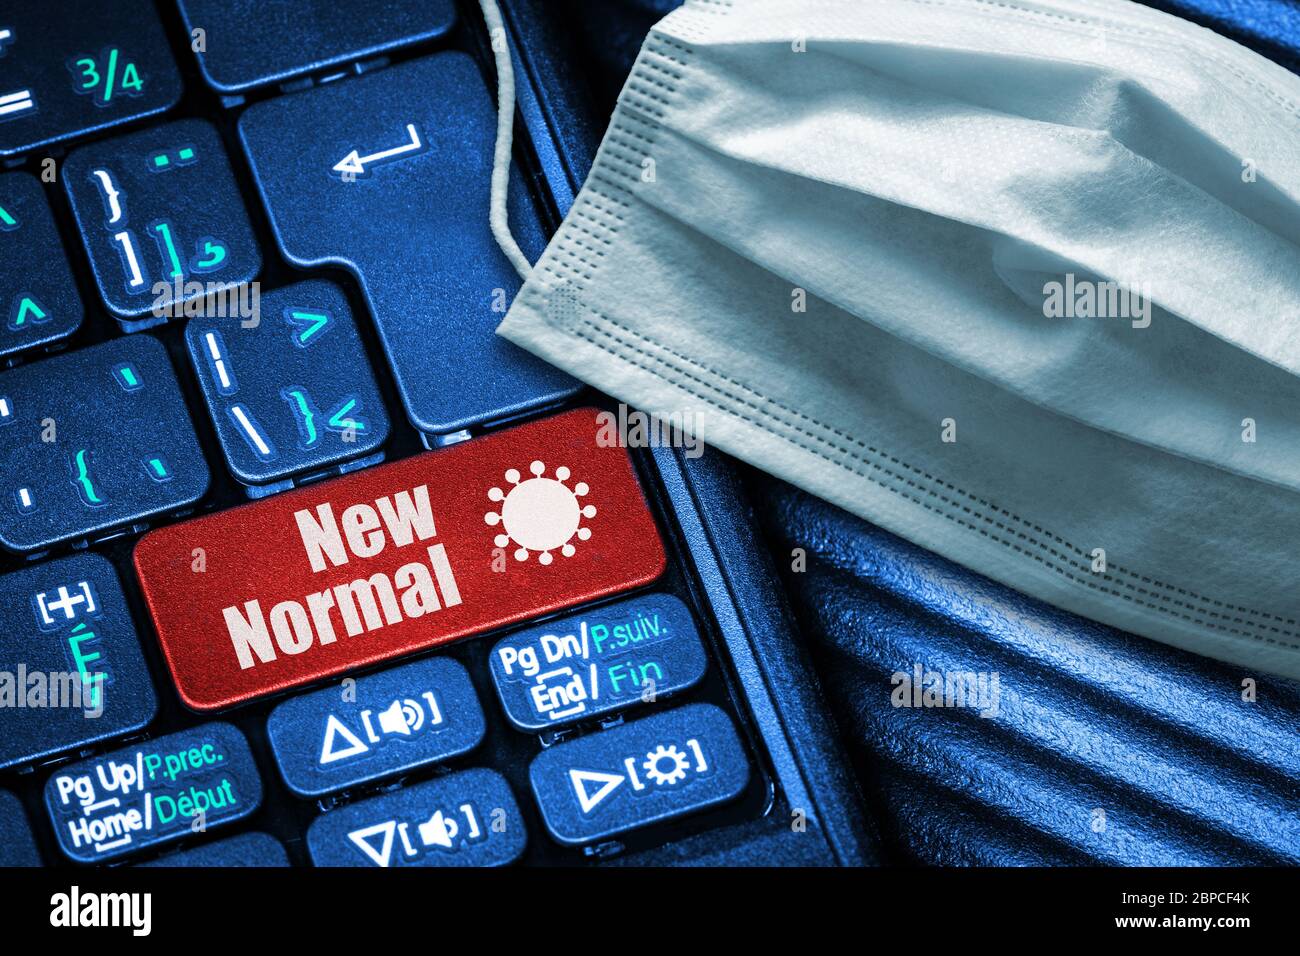 Concept of New Normal following Covid-19 reopening of economy and returning to work as illustrated by computer keyboard with red button text and face Stock Photo